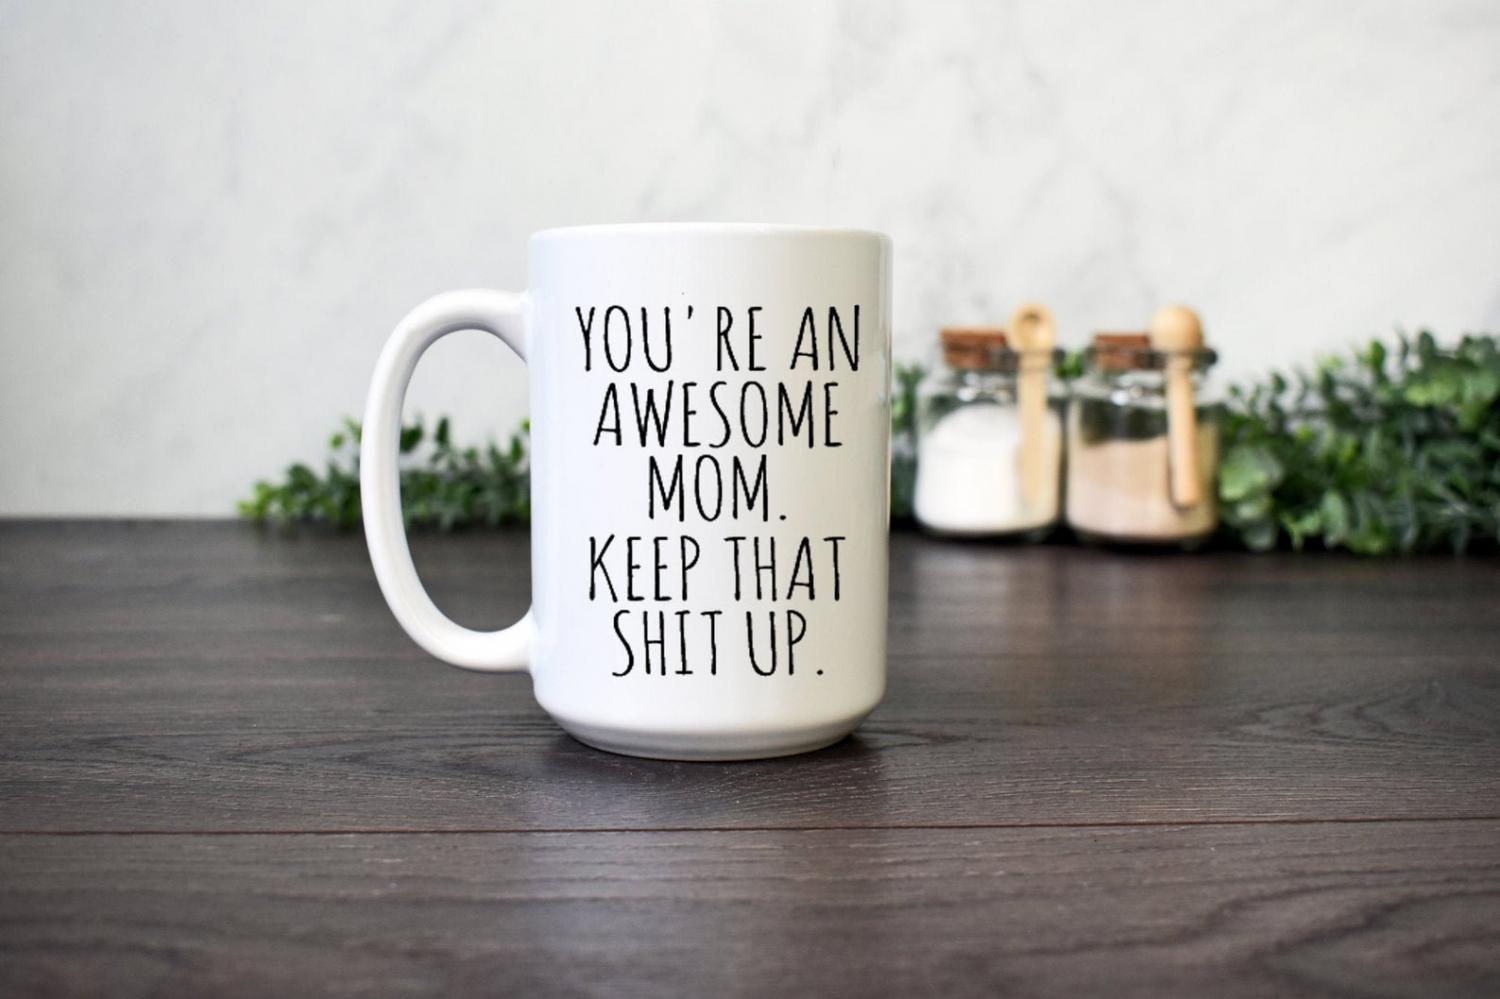 You are an awesome Mom, keep that shit up - Funny creative mothers day coffee mug